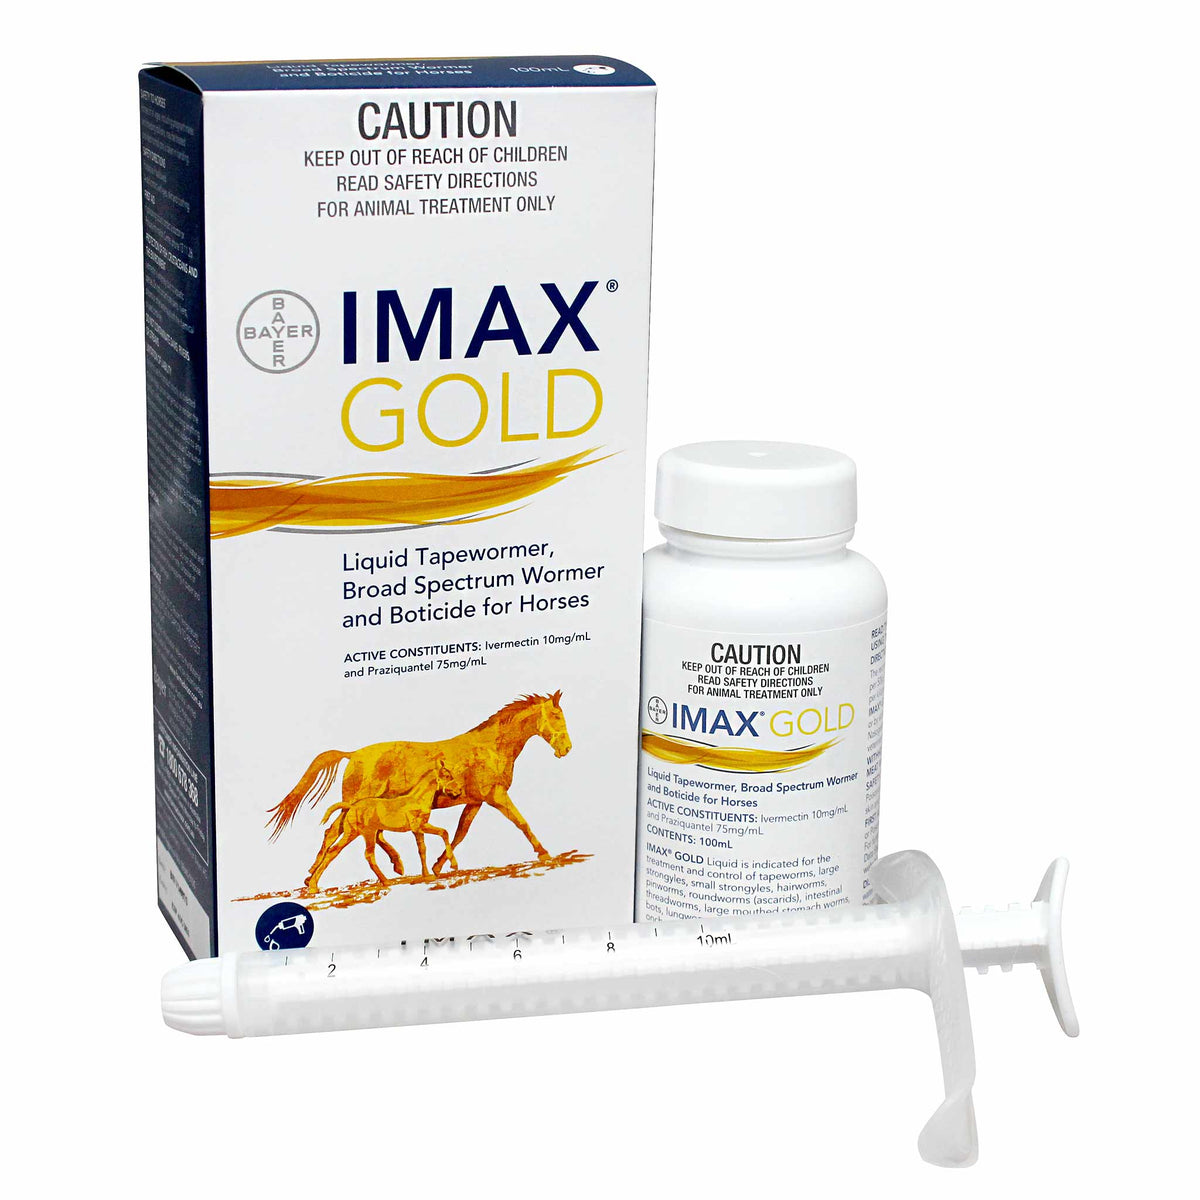 Imax Gold Broad Spectrum Wormer &amp; Boticide for Horses 100ml